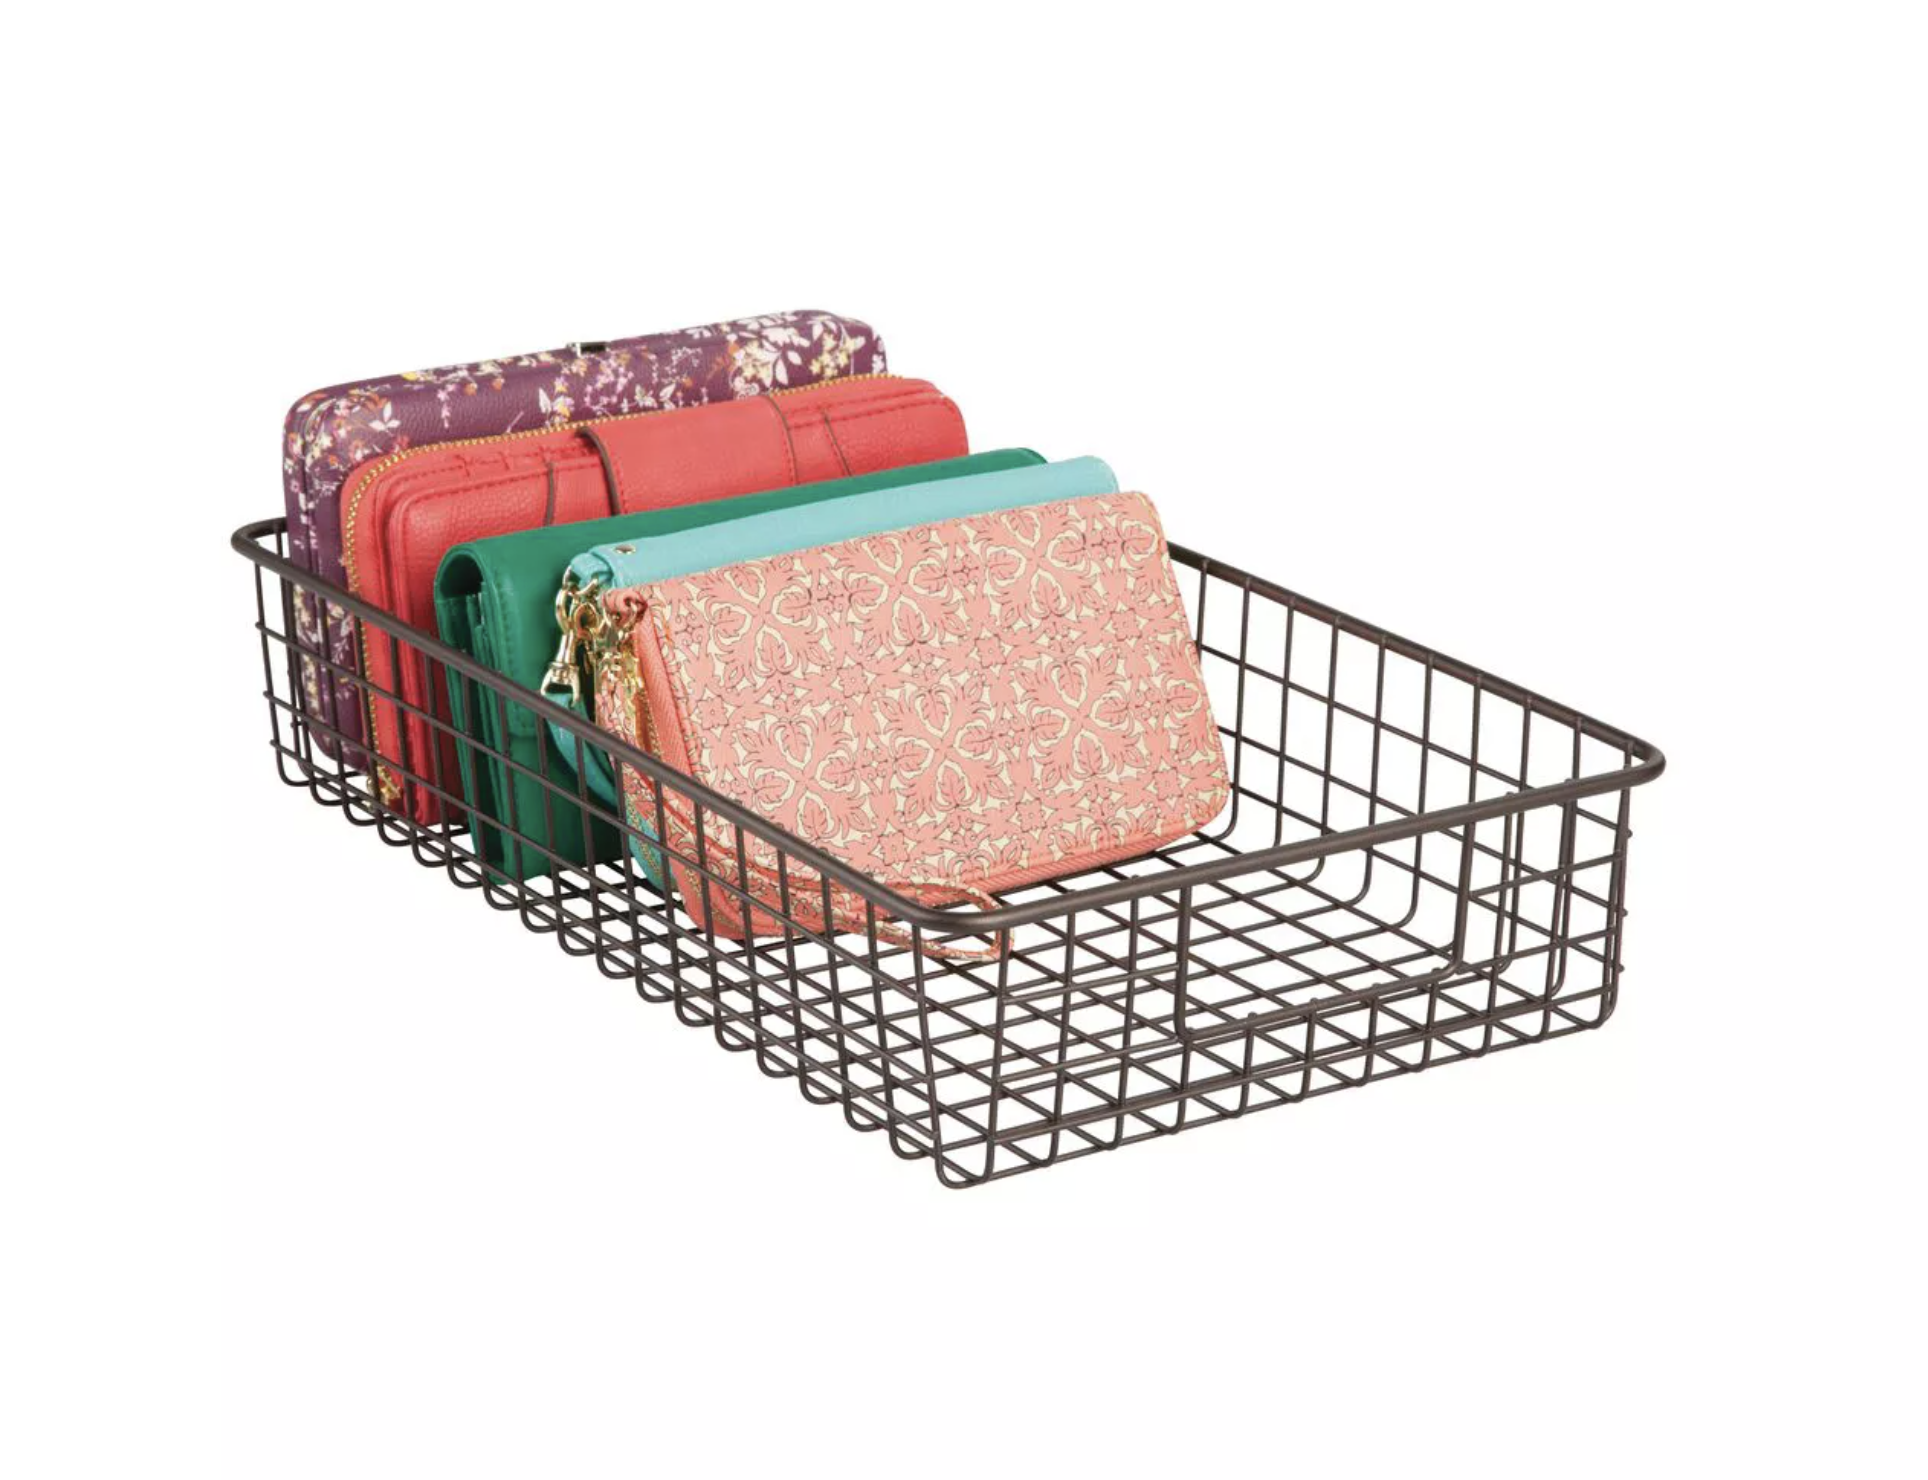 the wire basket with small purses in it